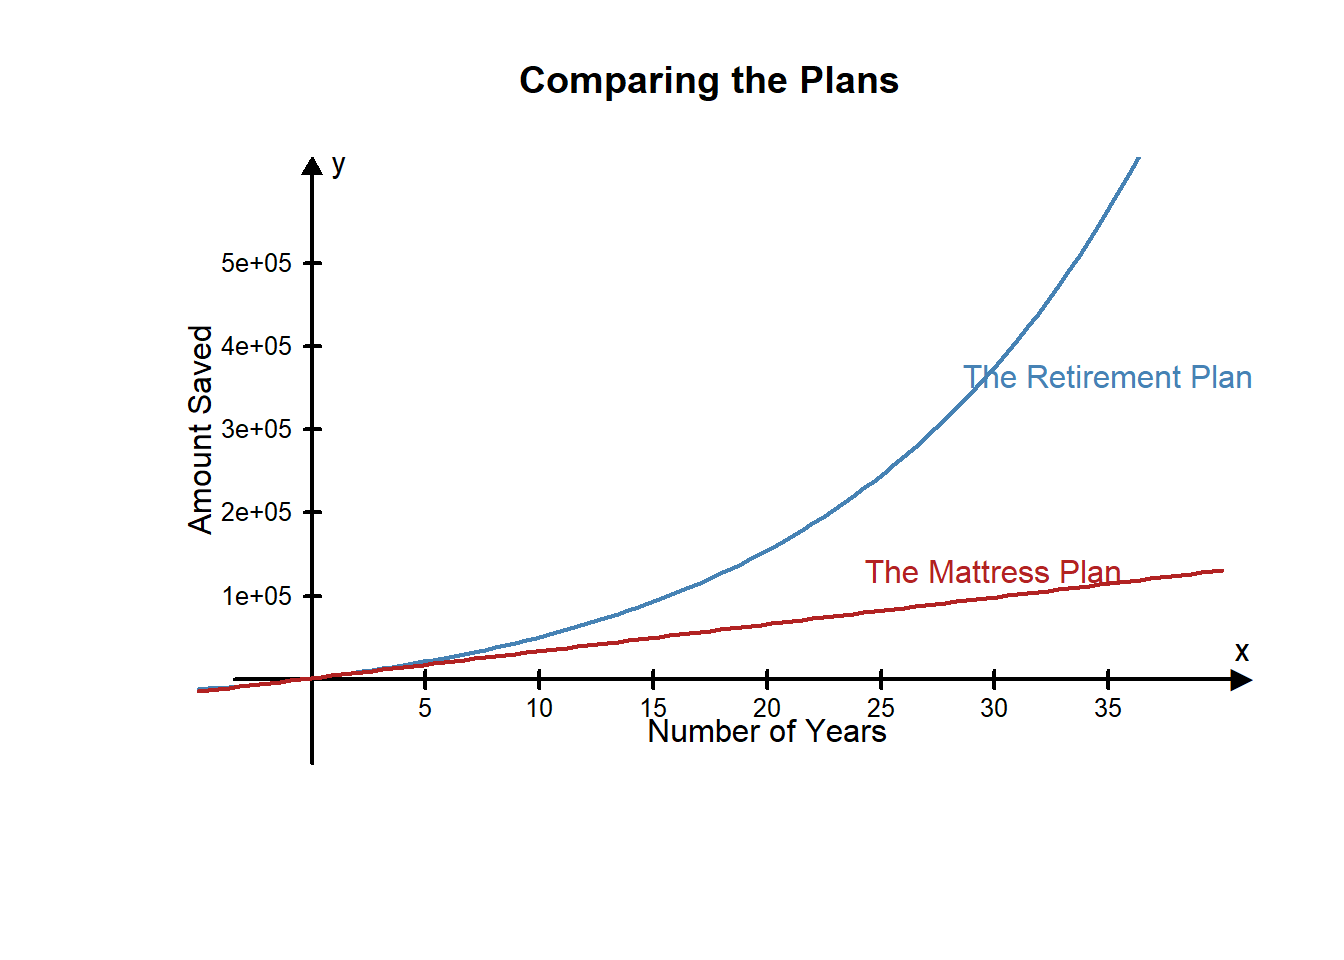 Diagram showing the difference between a formal retirement plan and someone who saves for retirement by stashing money in their mattress each line is over the period of 35 years. The mattress plan has a steady incline while the formal retirement plan has a very sharp incline at year 10.